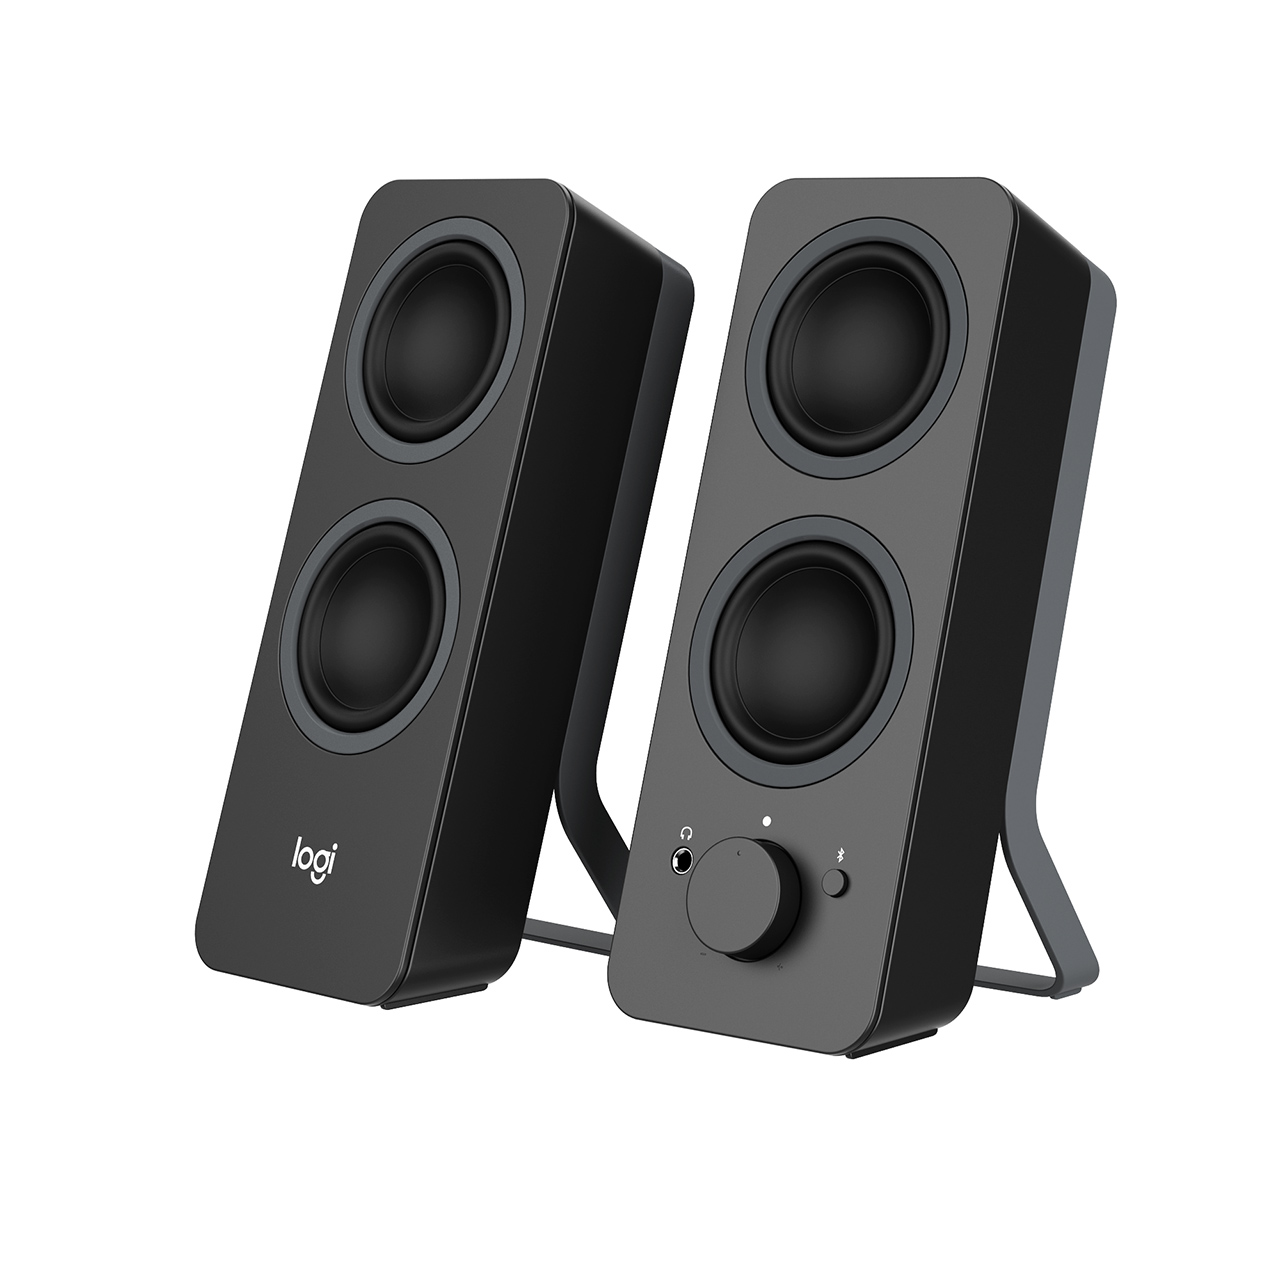 Z207 Stereo Computer Speakers by Logitech